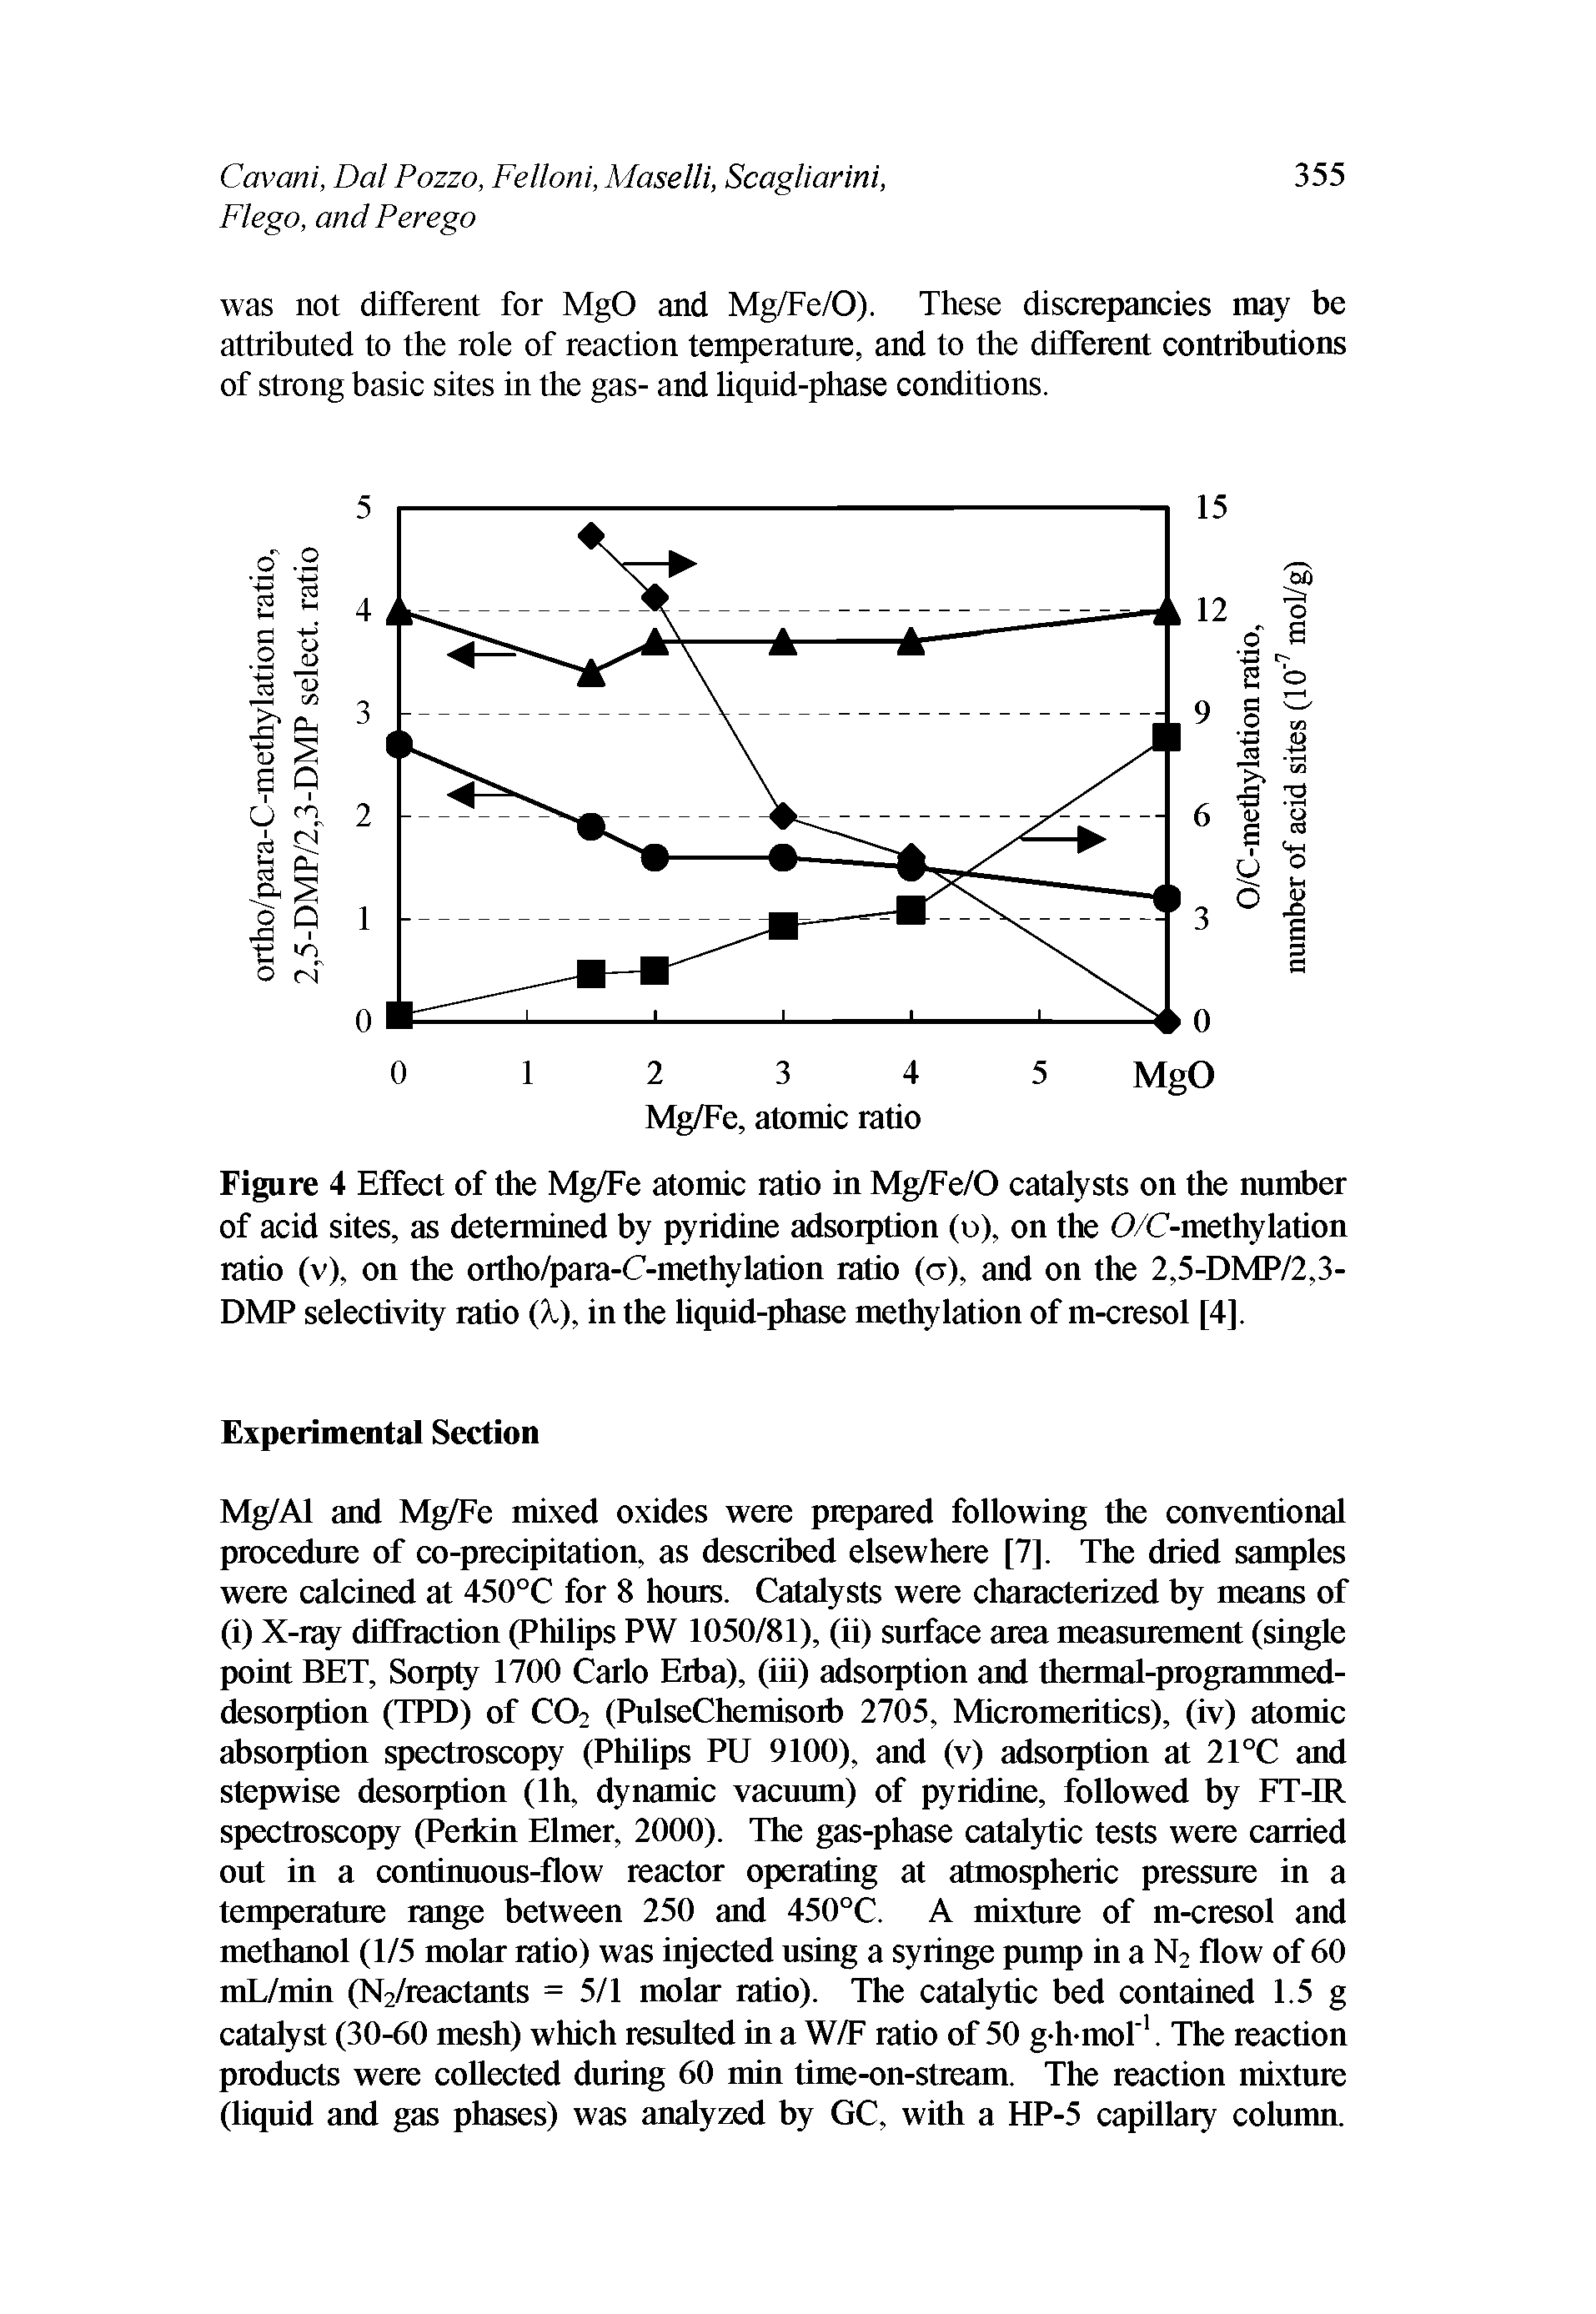 Figure 4 Effect of the Mg/Fe atomic ratio in Mg/Fe/O catalysts on the number of acid sites, as determined by pyridine adsorption (o), on the Q C-methylation ratio (v), on the ortho/para-C-methylation ratio (a), and on the 2,5-DMP/2,3-DMP selectivity ratio (/ ), in the liquid-phase methylation of m-cresol [4],...